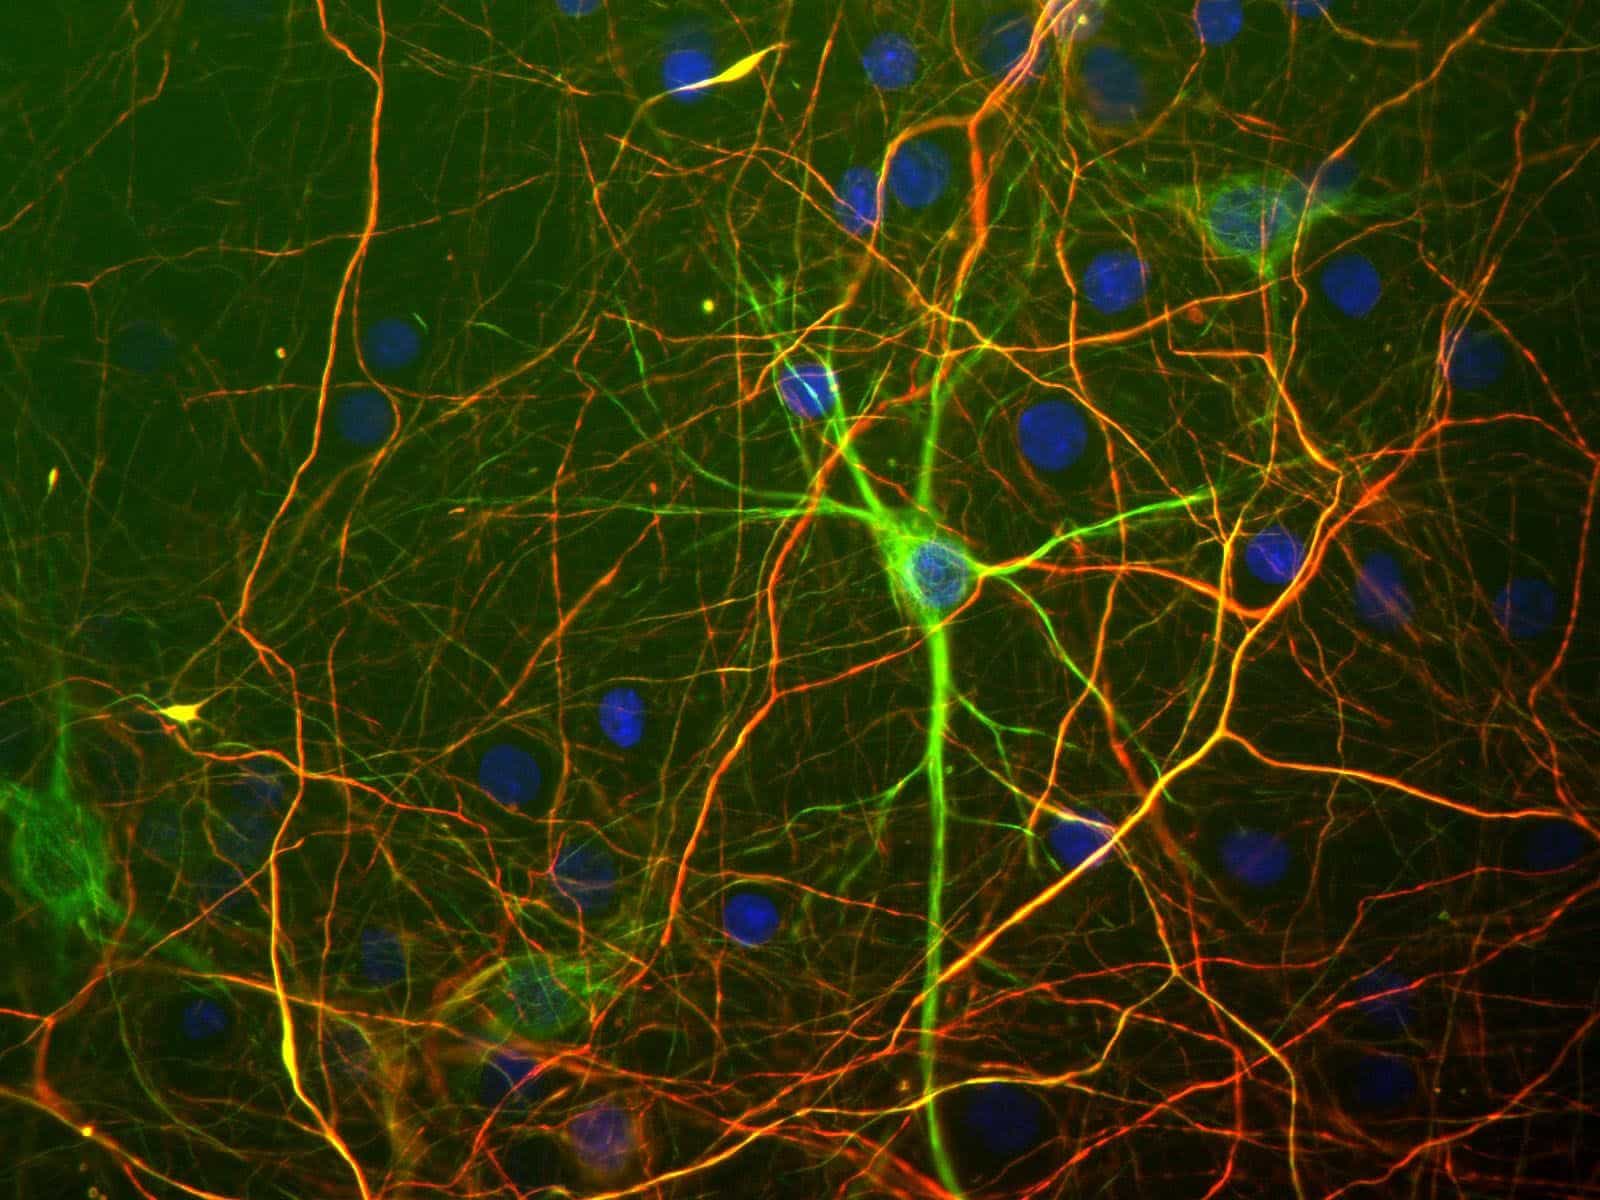 neurons responsible for Habits